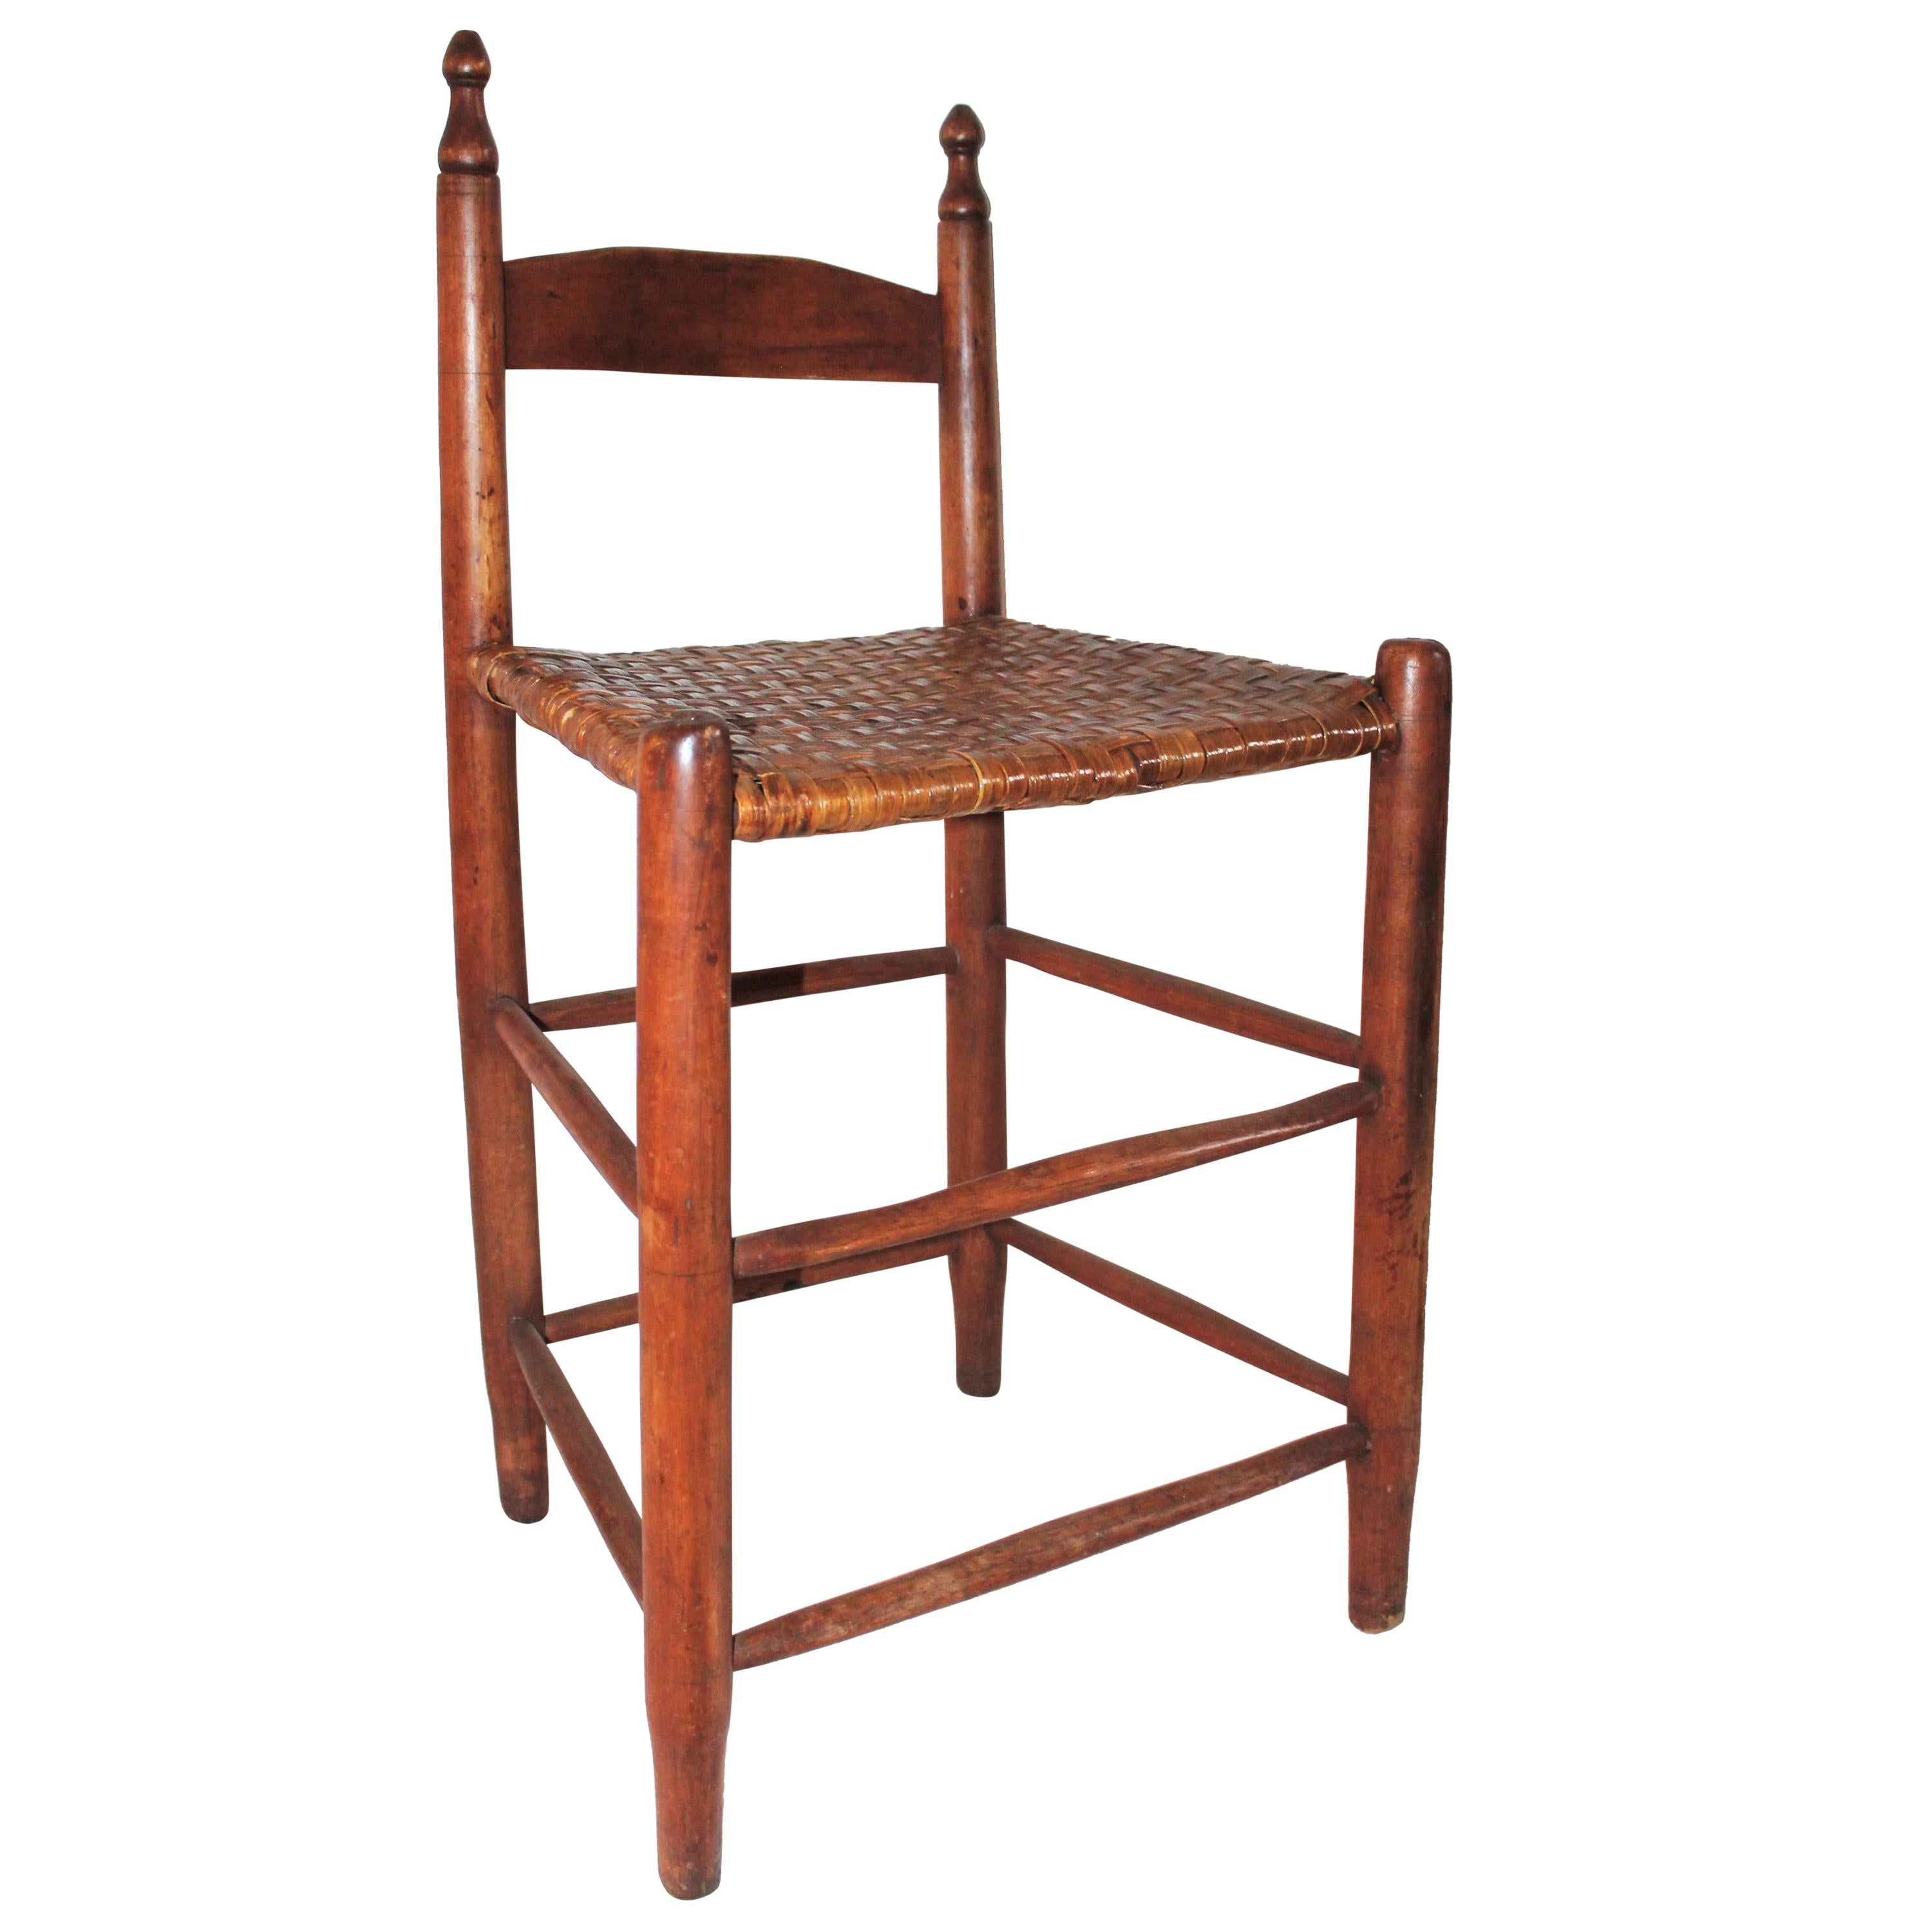 19th Century Shaker Style Chair